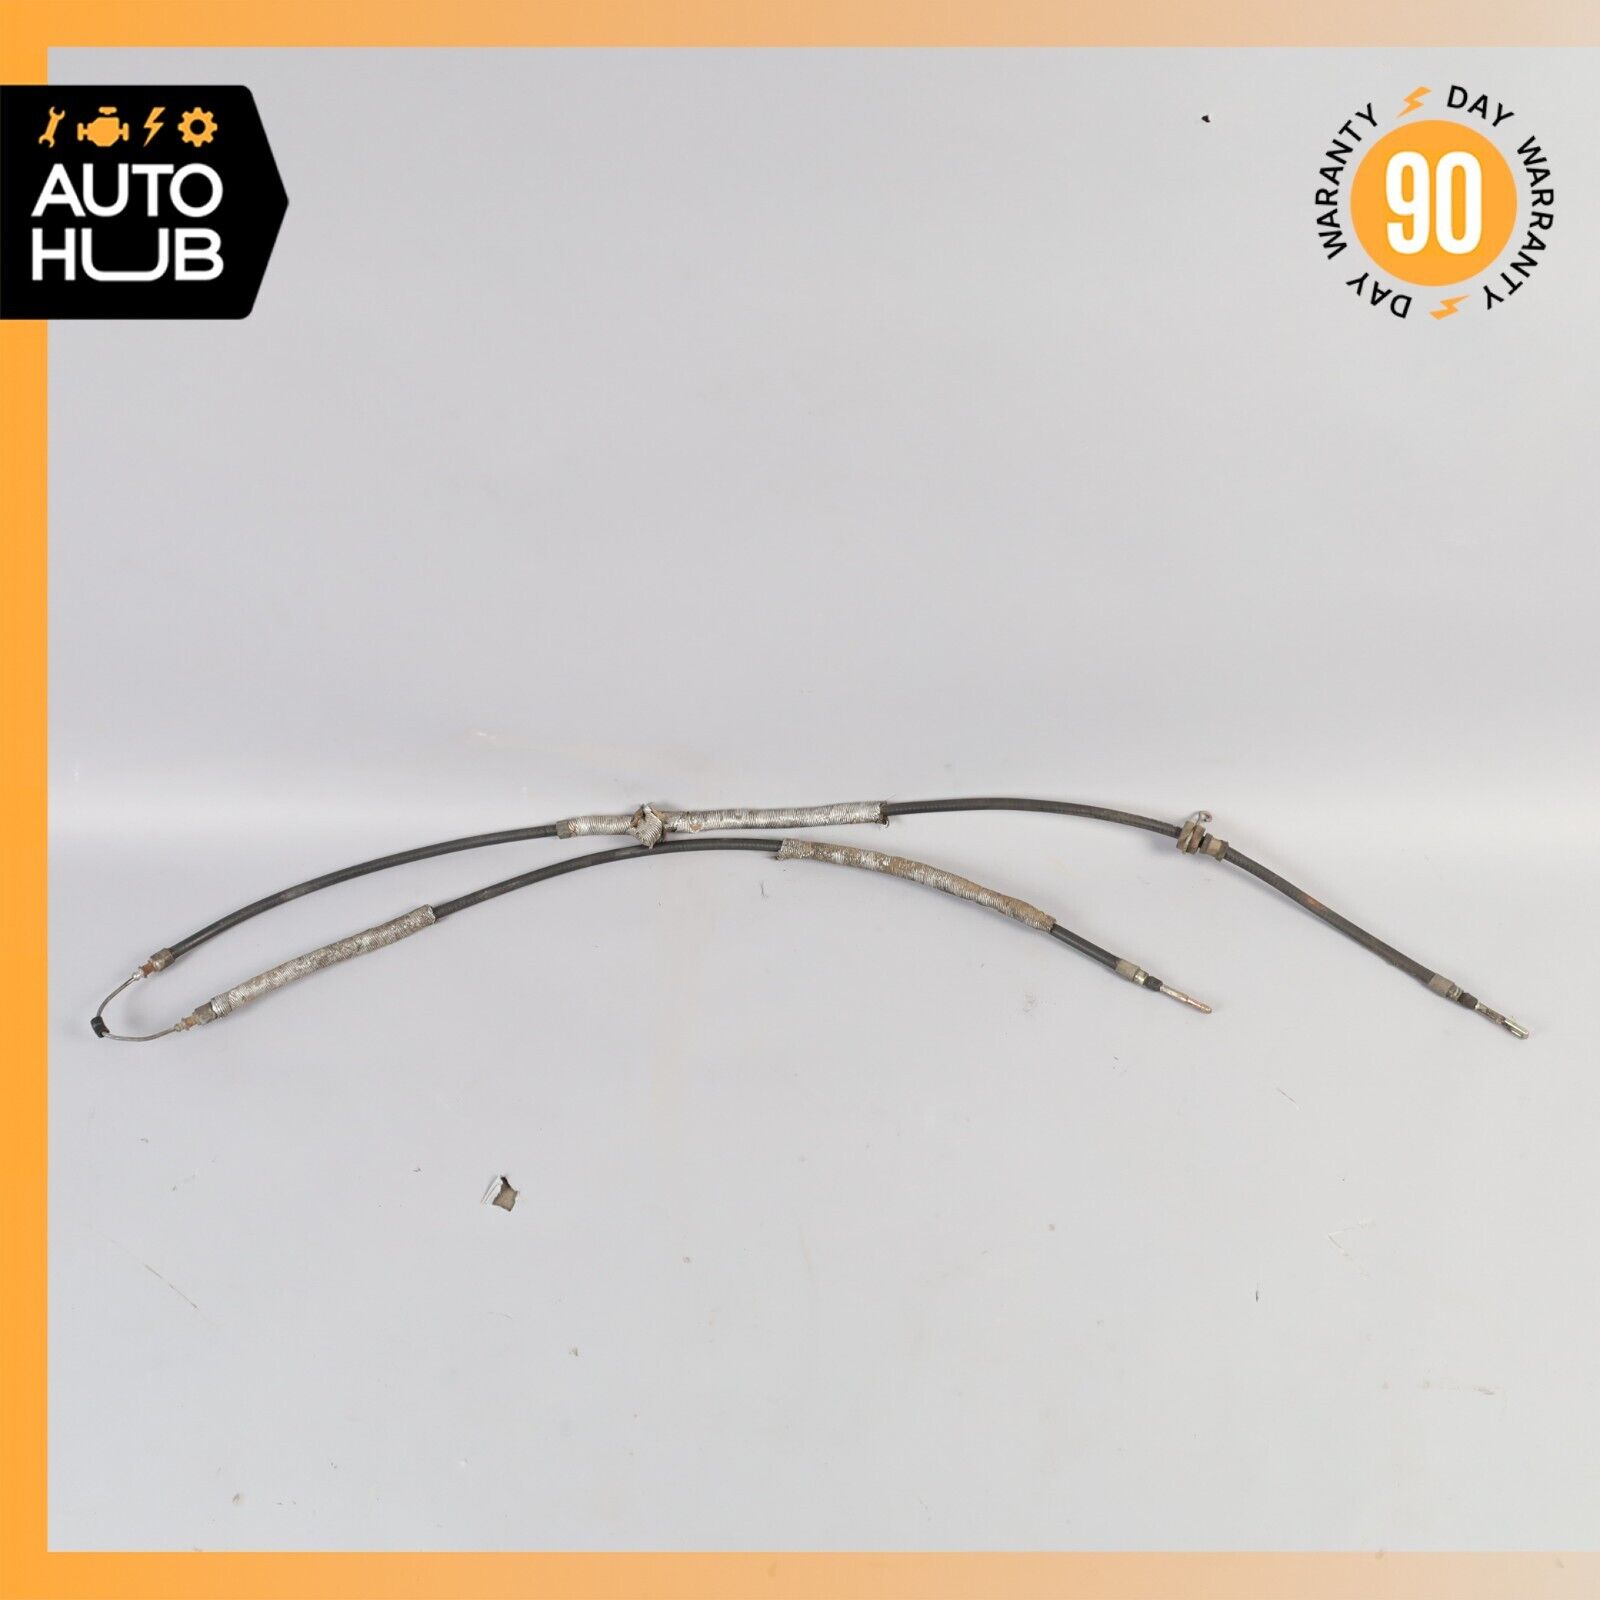 02-07 Maserati Coupe 4200 M138 GT Emergency Parking Brake Cable OEM